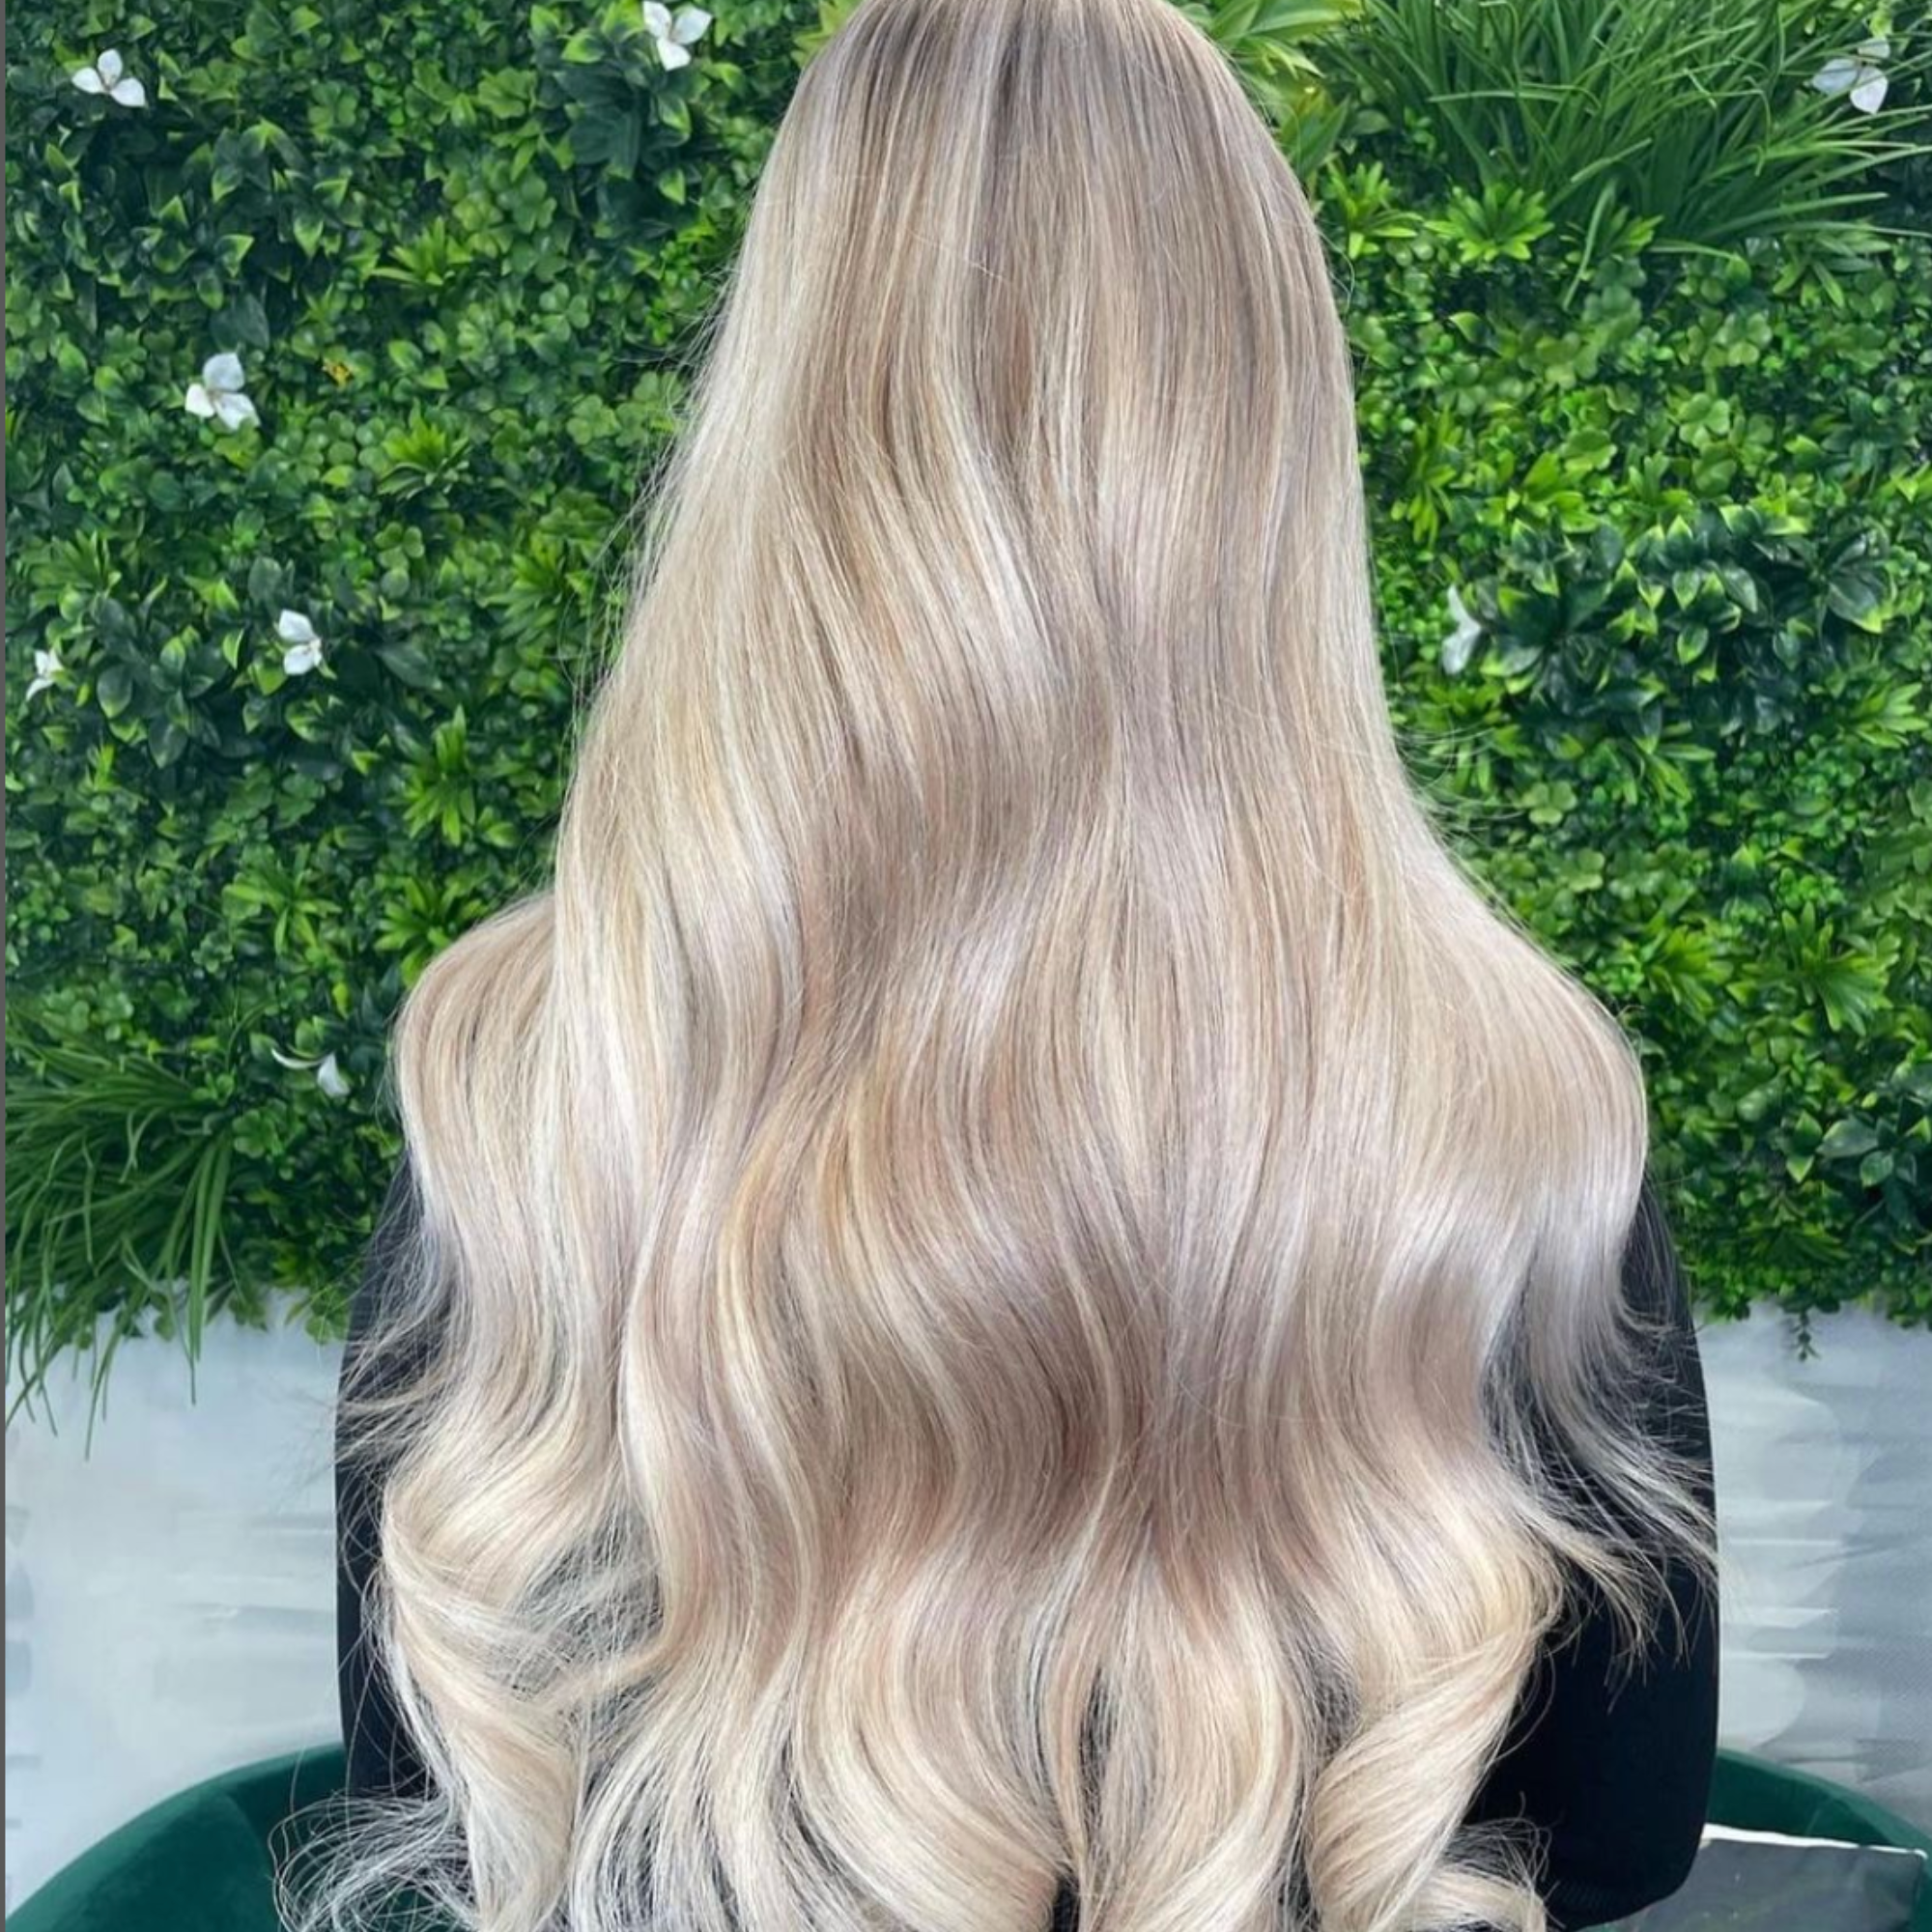 22" Invisible Tape Extensions Steel Blonde